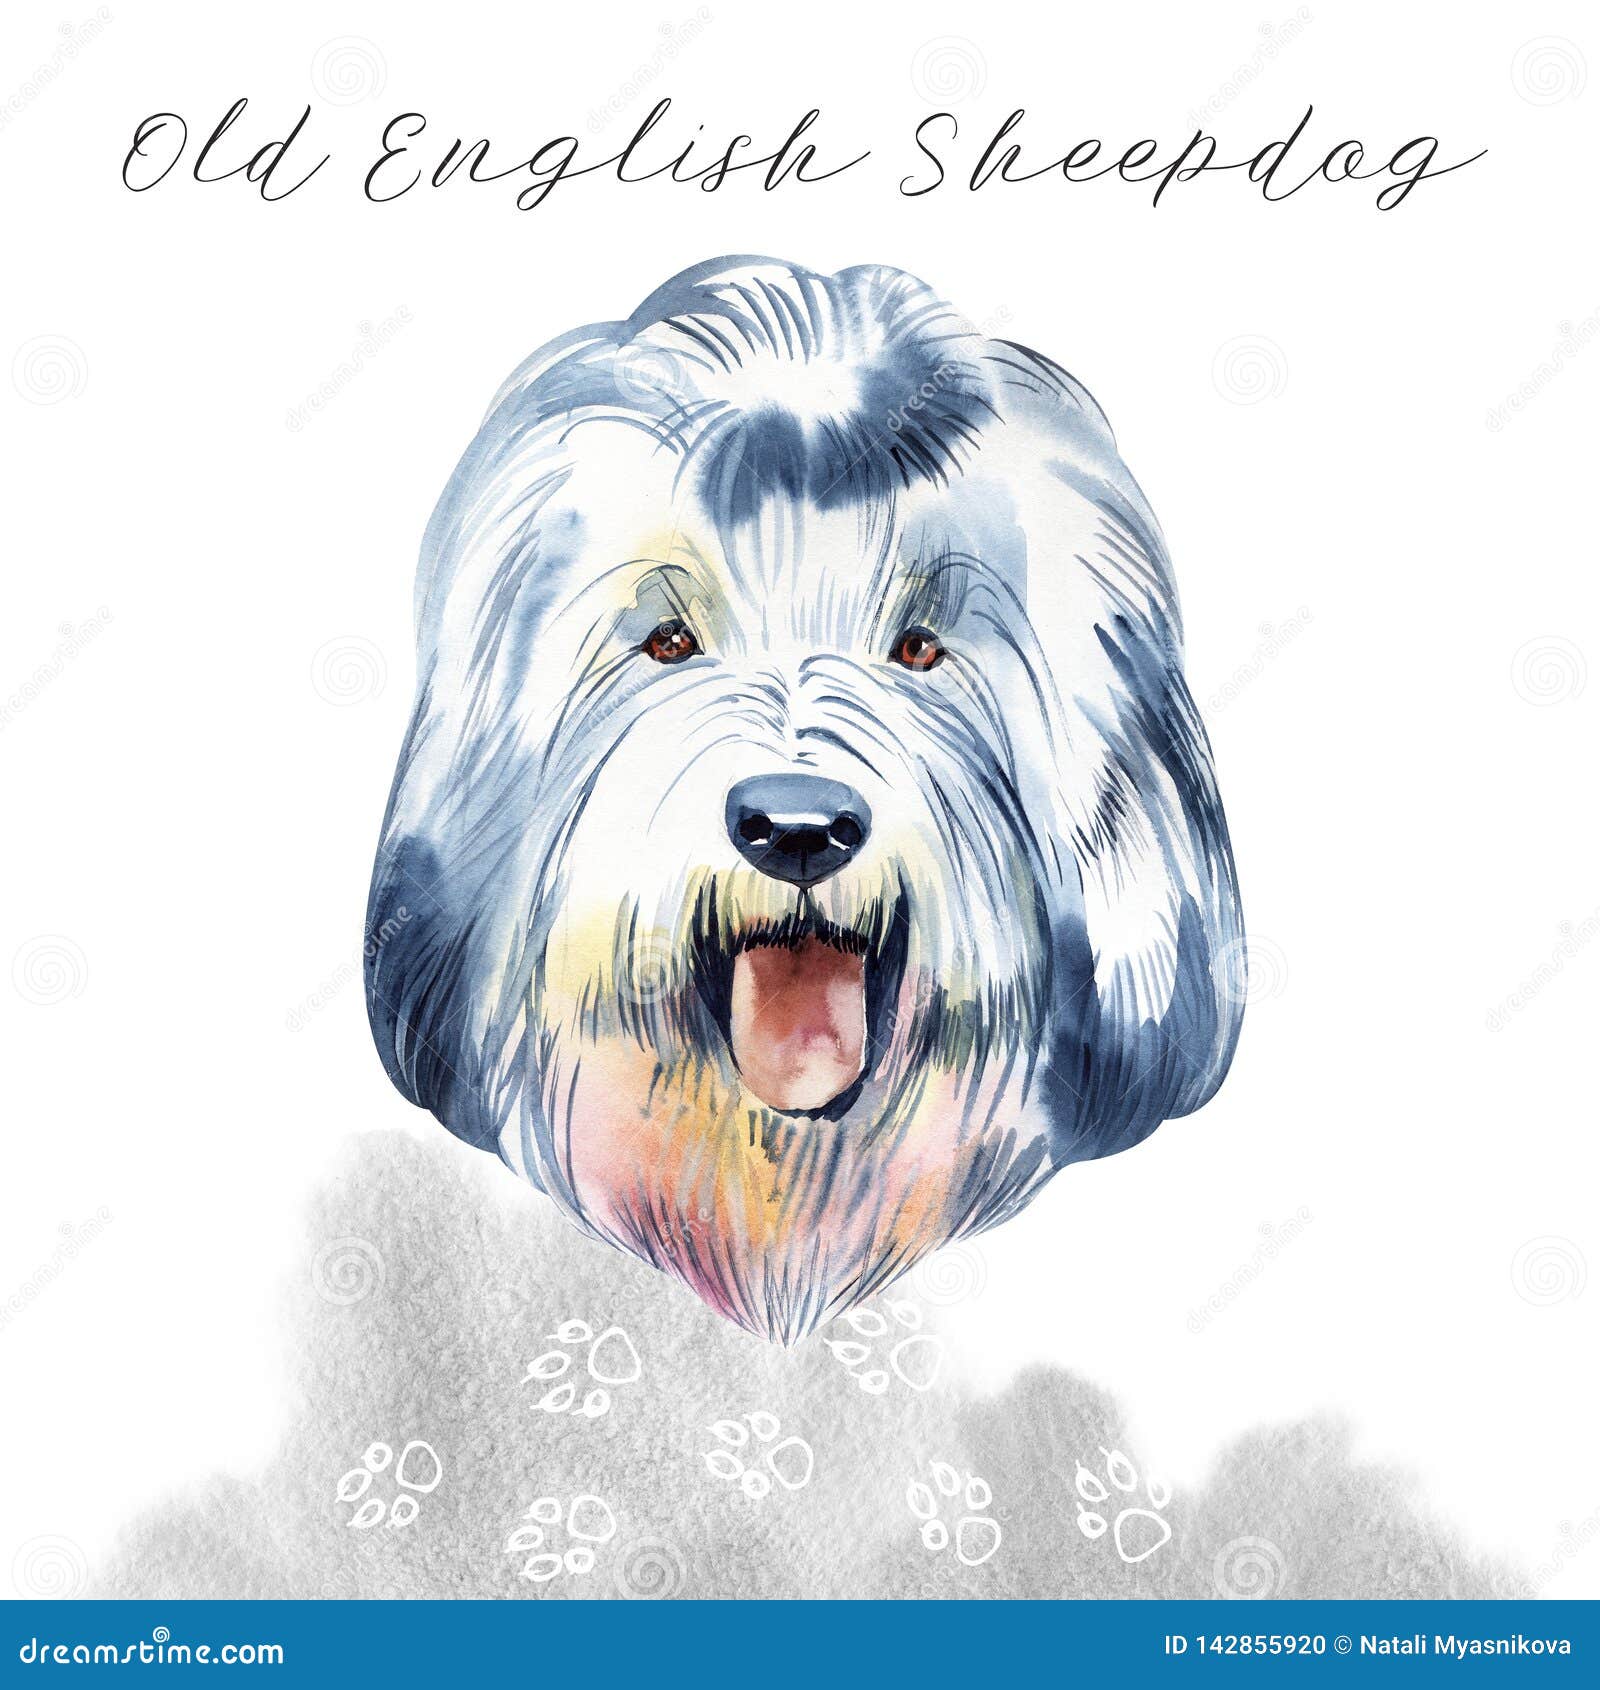 Old English Sheepdog Used To Watch Livestock At Farms Isolated Digital Art Illustration England Originated Pet From Stock Illustration Illustration Of Domestic Canine 142855920